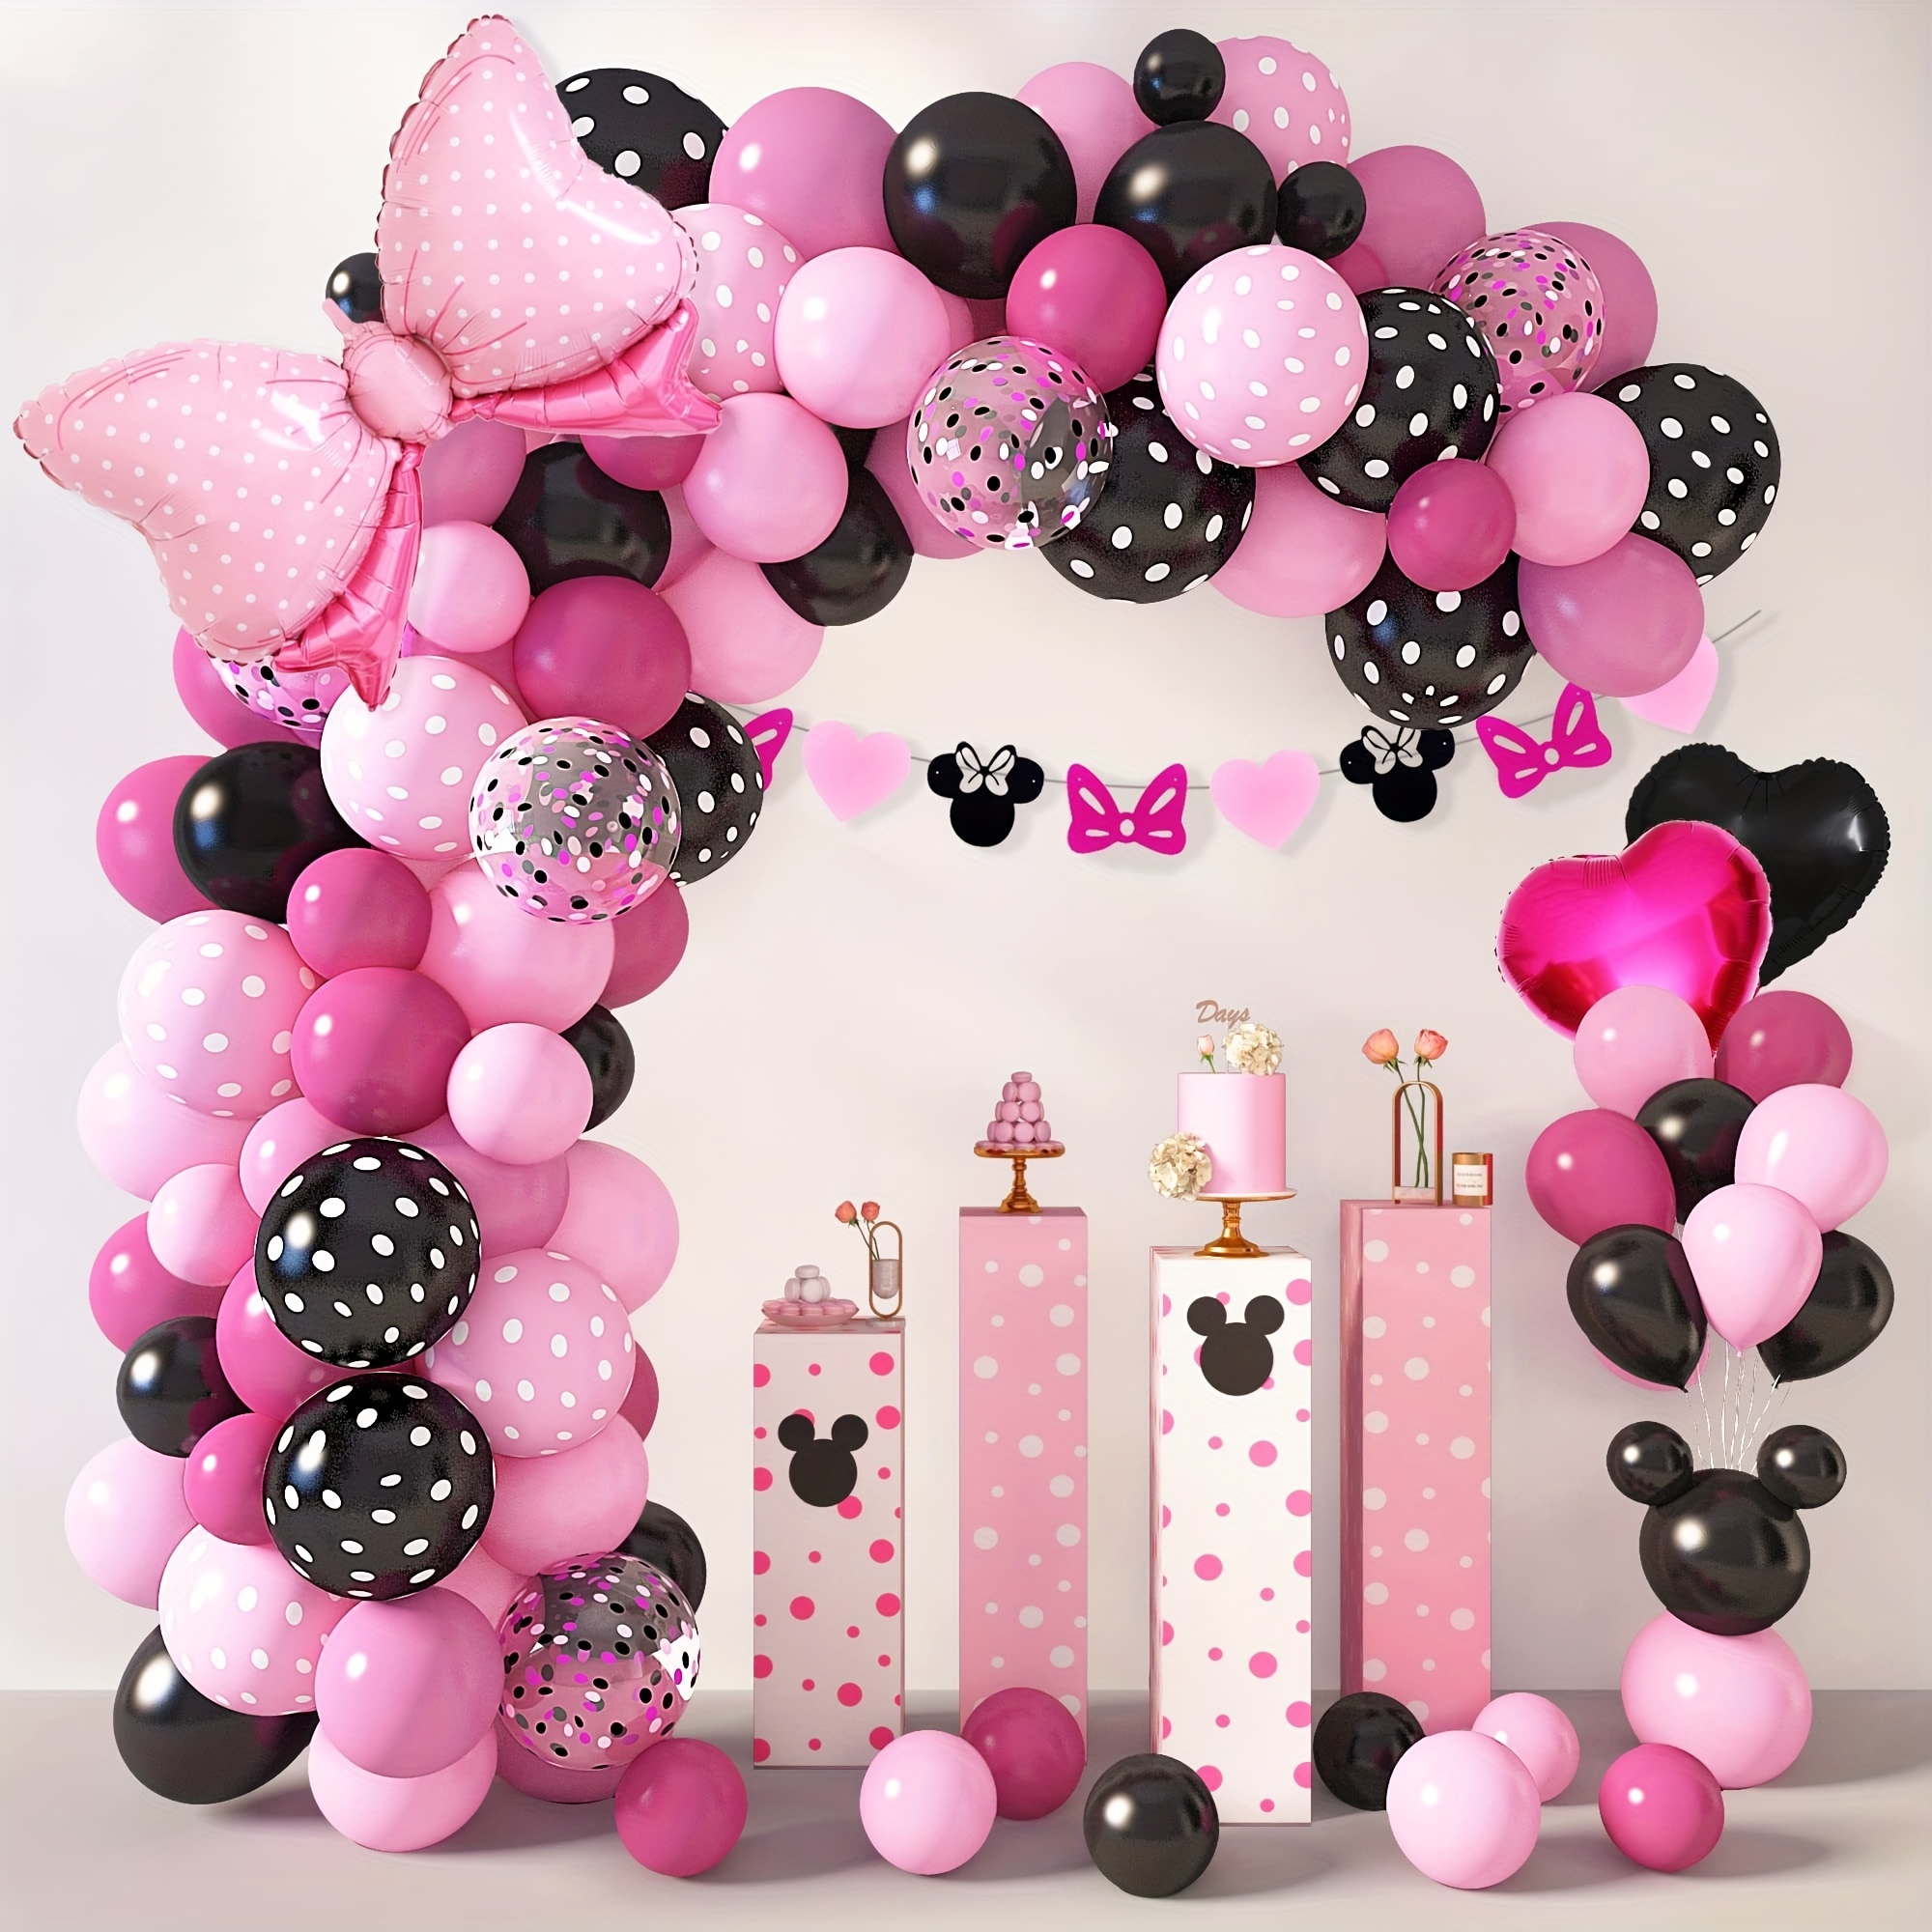 

113pcs, Mouse Balloon Garland Arch Kit For Cartoon Mouse Theme Birthday Party Decoration Girls, Pink Black Rose Red Bow Foil Balloon Banner, Shower Party Supplies